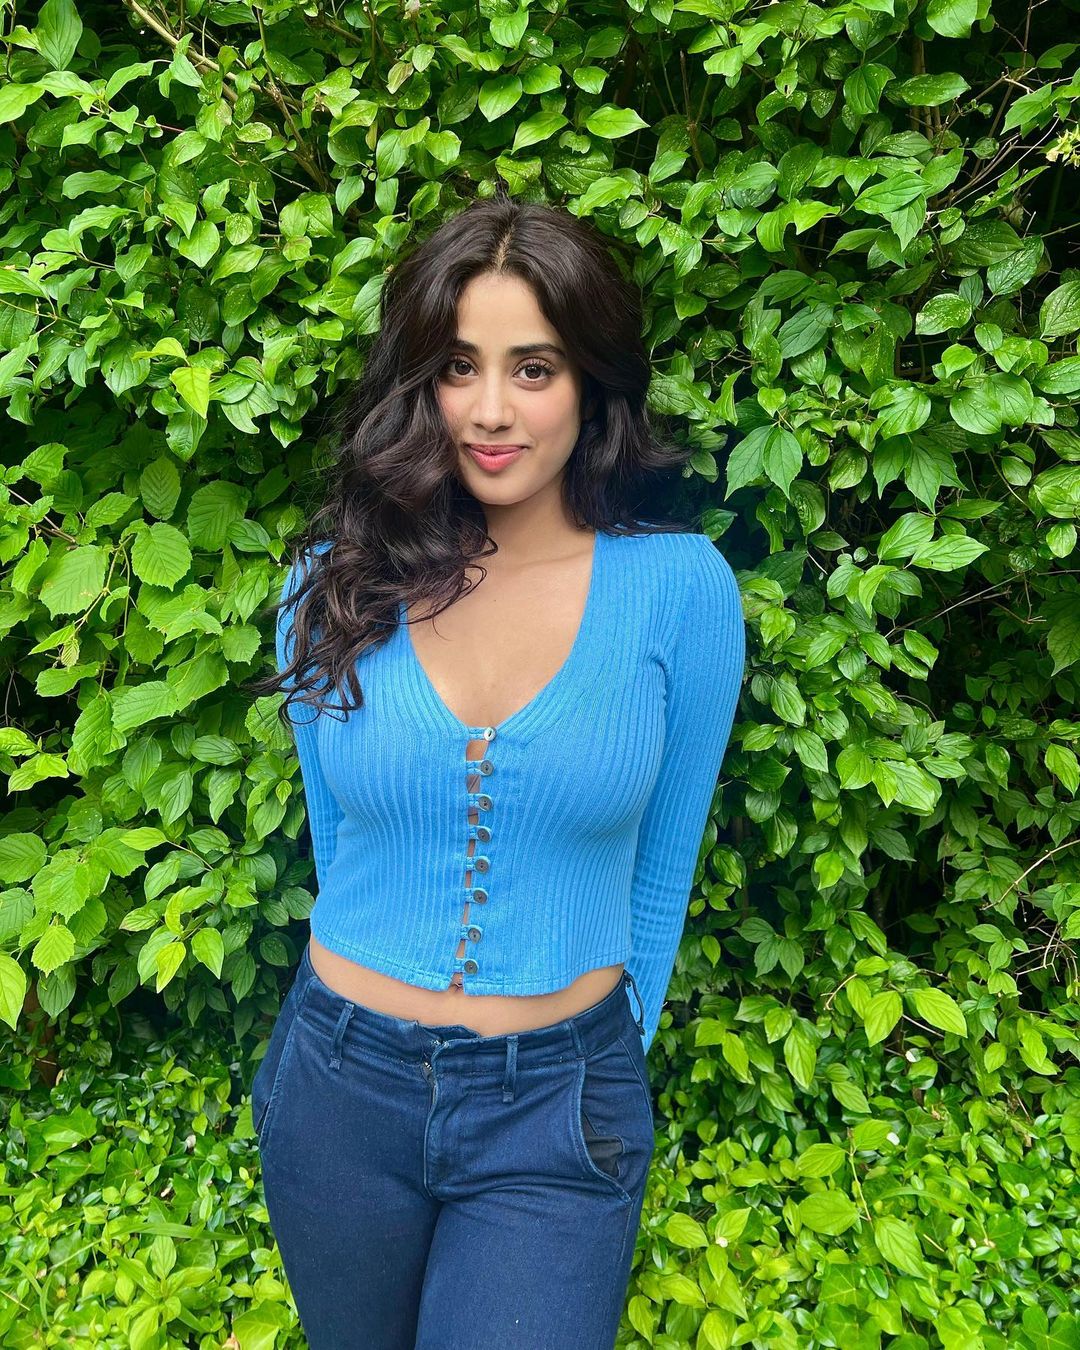 Janhvi Kapoor looks drop-dead gorgeous in the ribbed cardigan top and denims